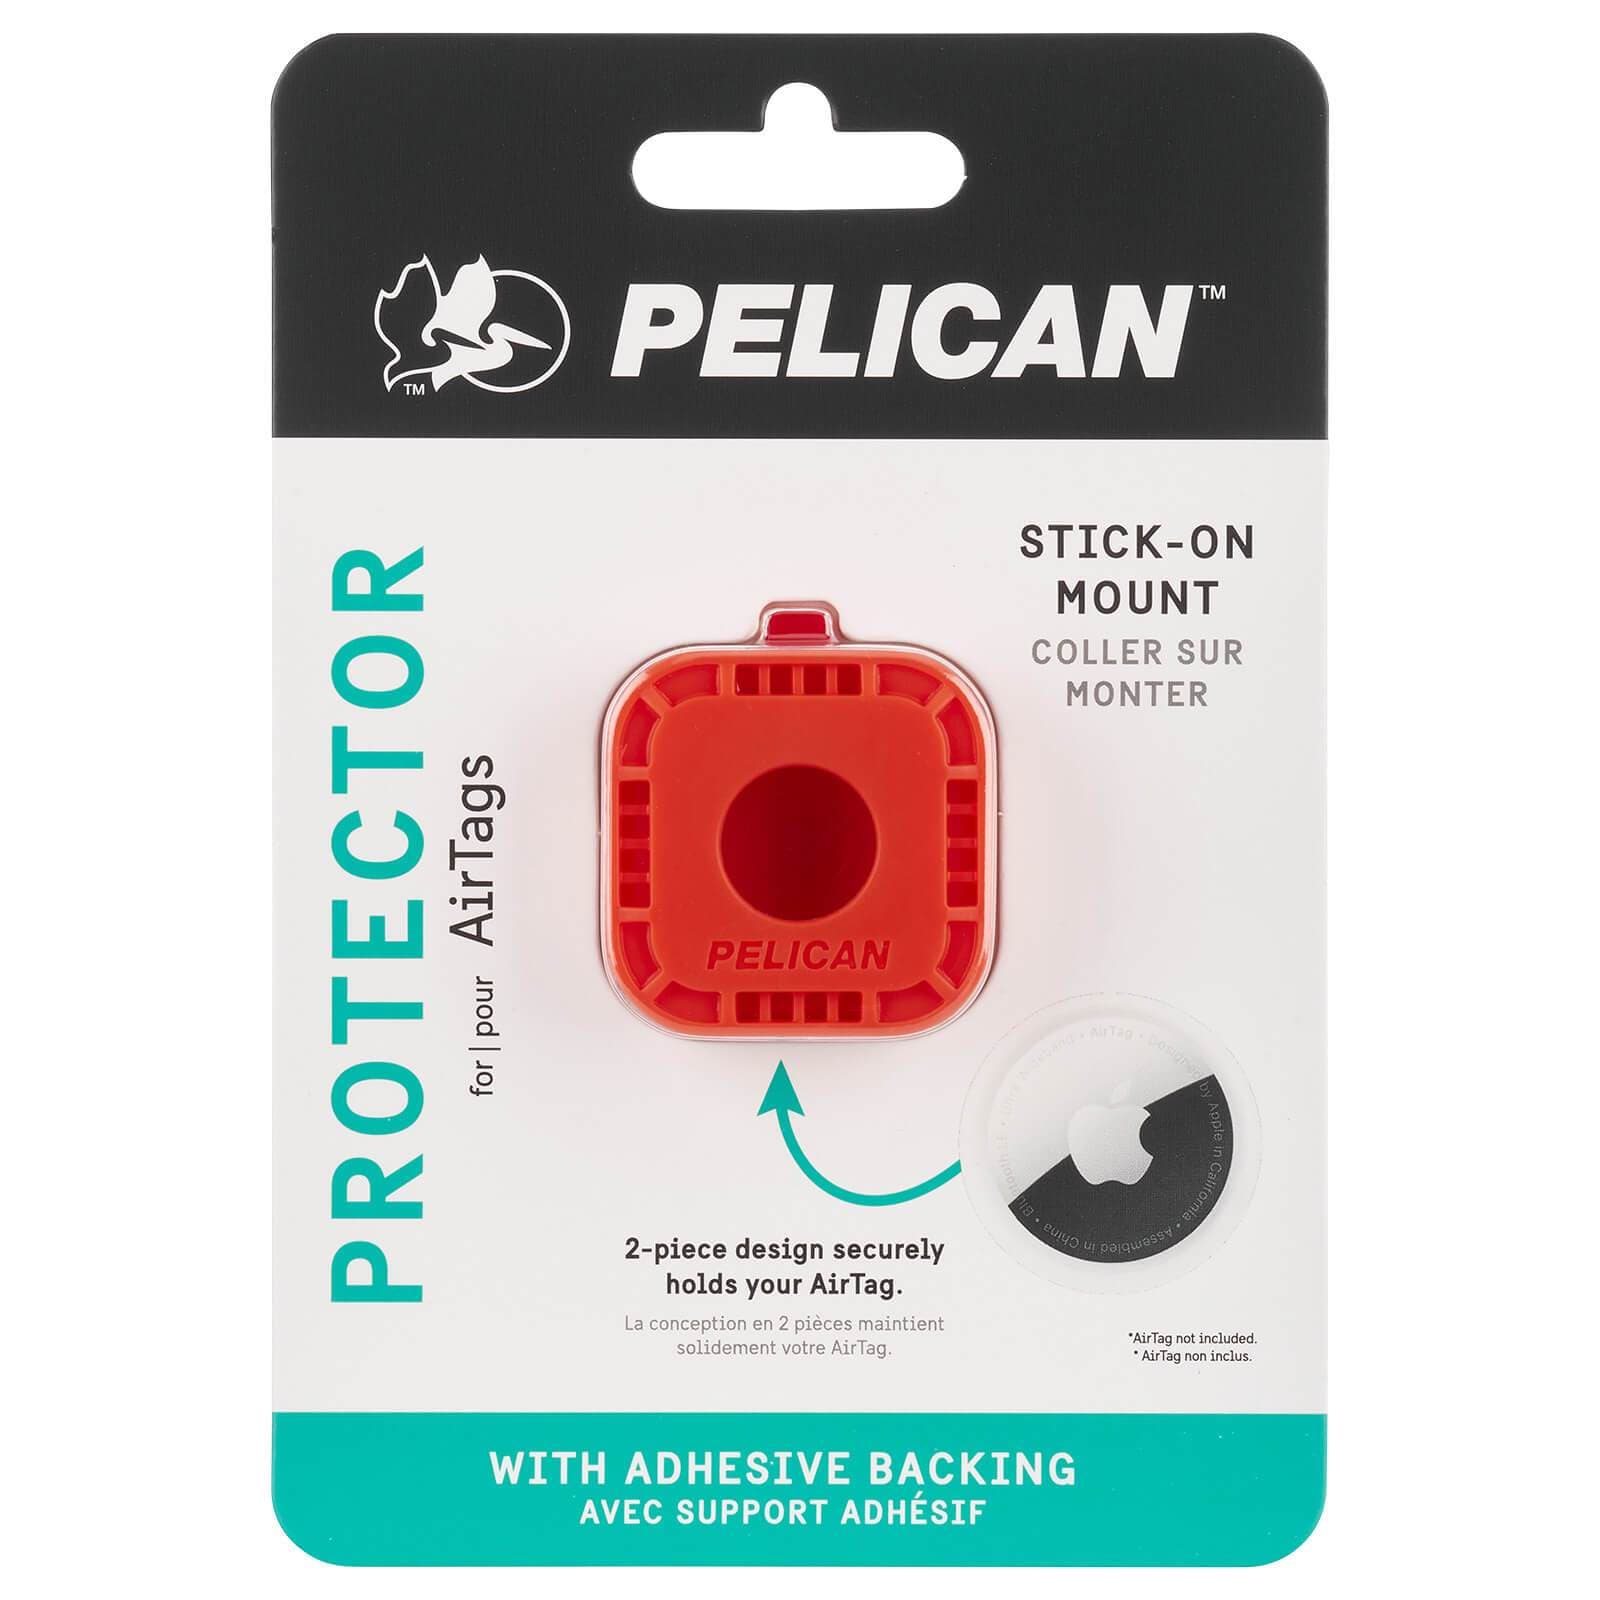 Pelican Protector for AirTags. Stick-on mount. 2-piece design securely holds your AirTag with Adhesive Backing. color::Orange